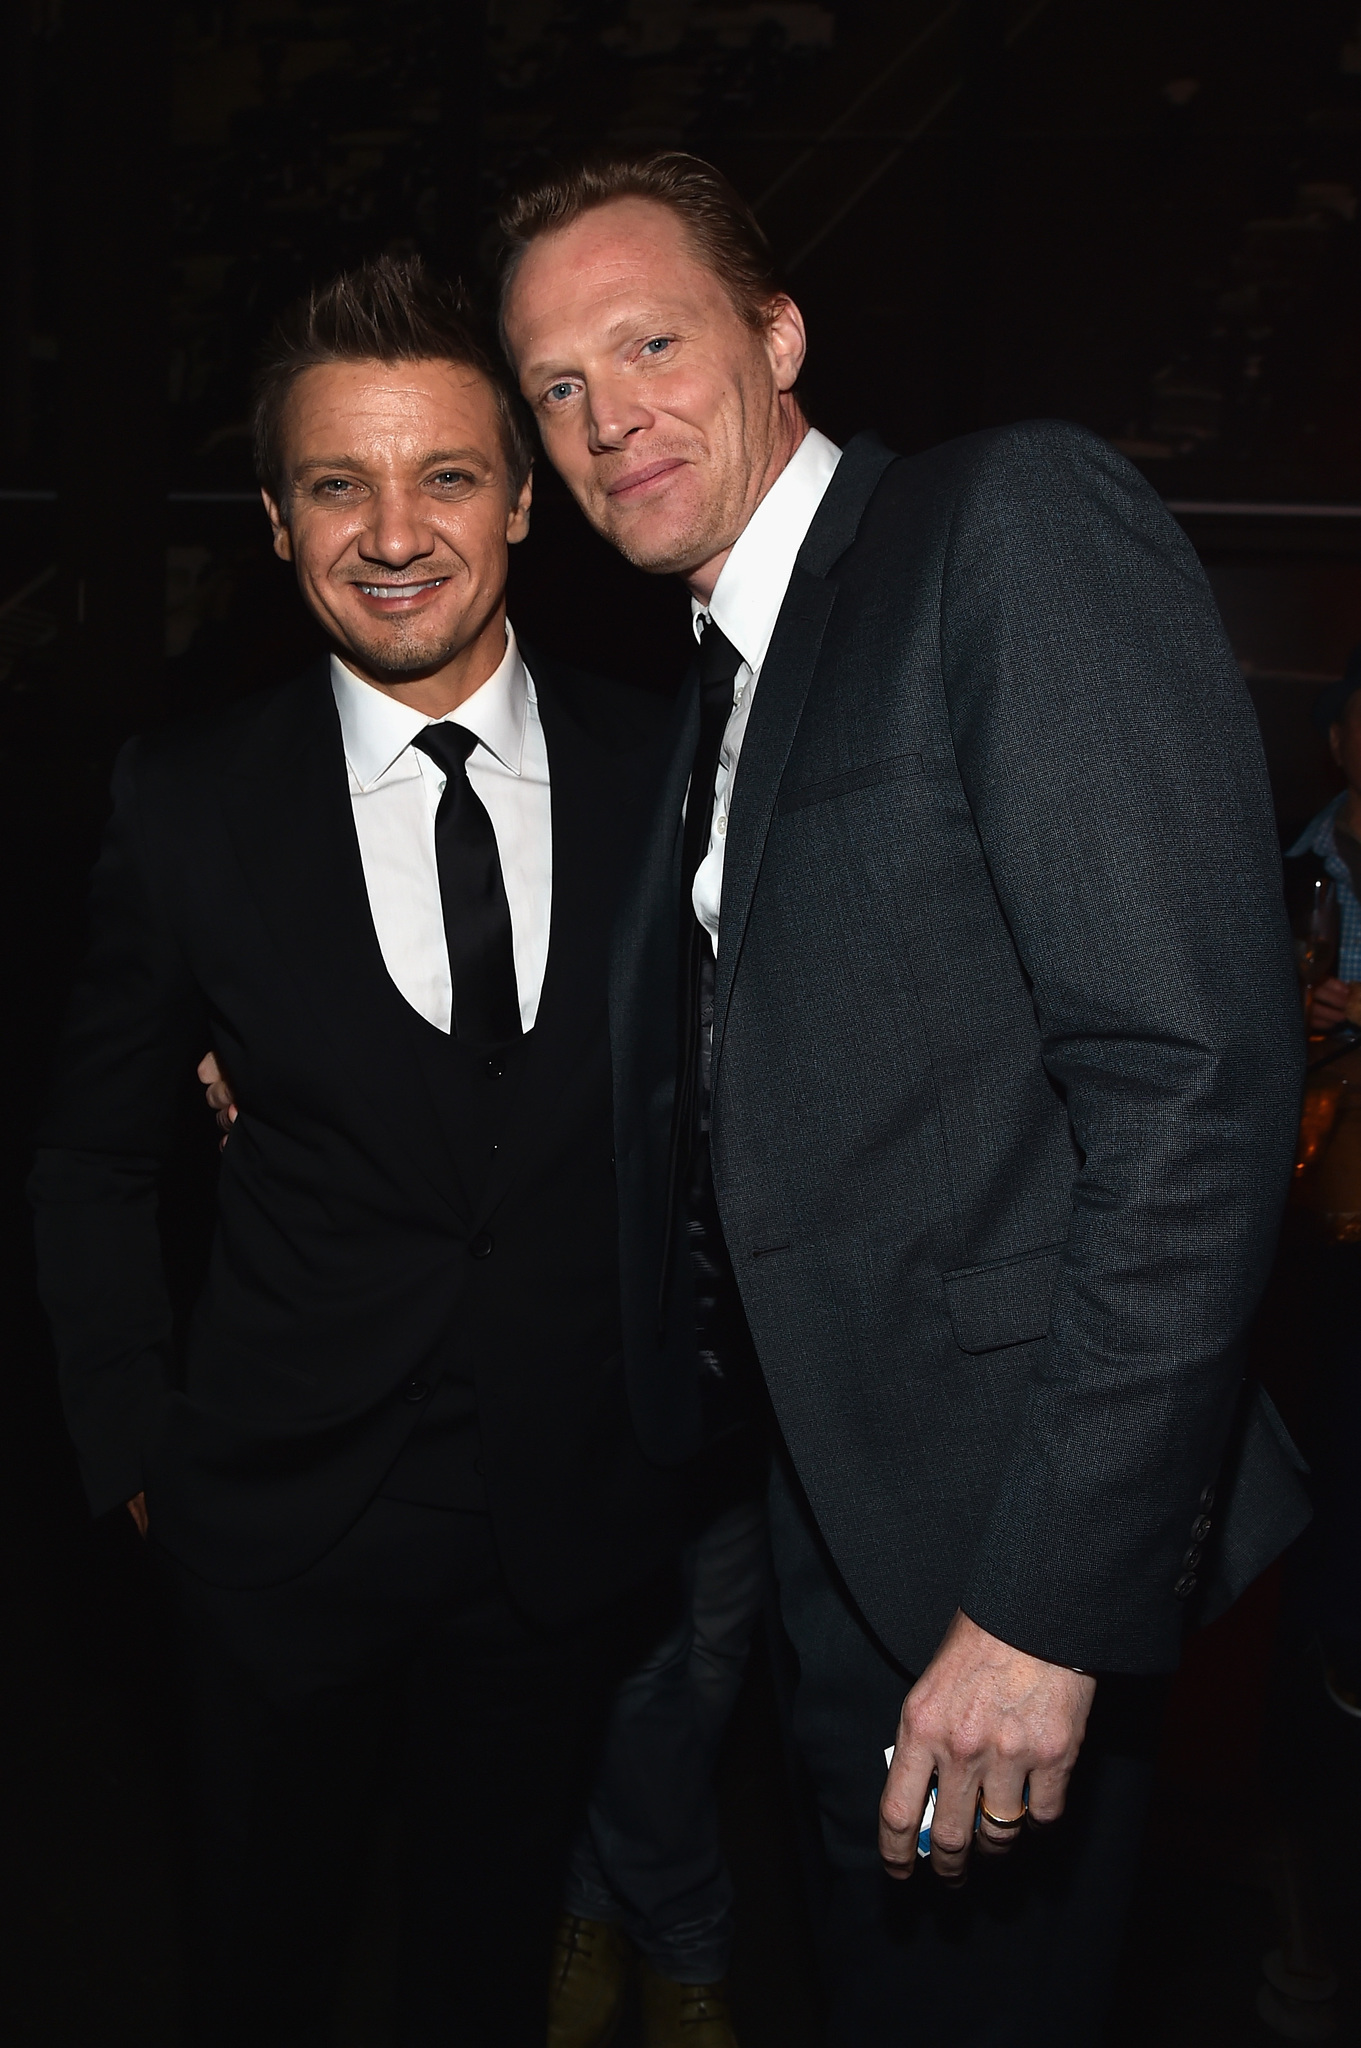 Paul Bettany and Jeremy Renner at event of Kersytojai 2 (2015)